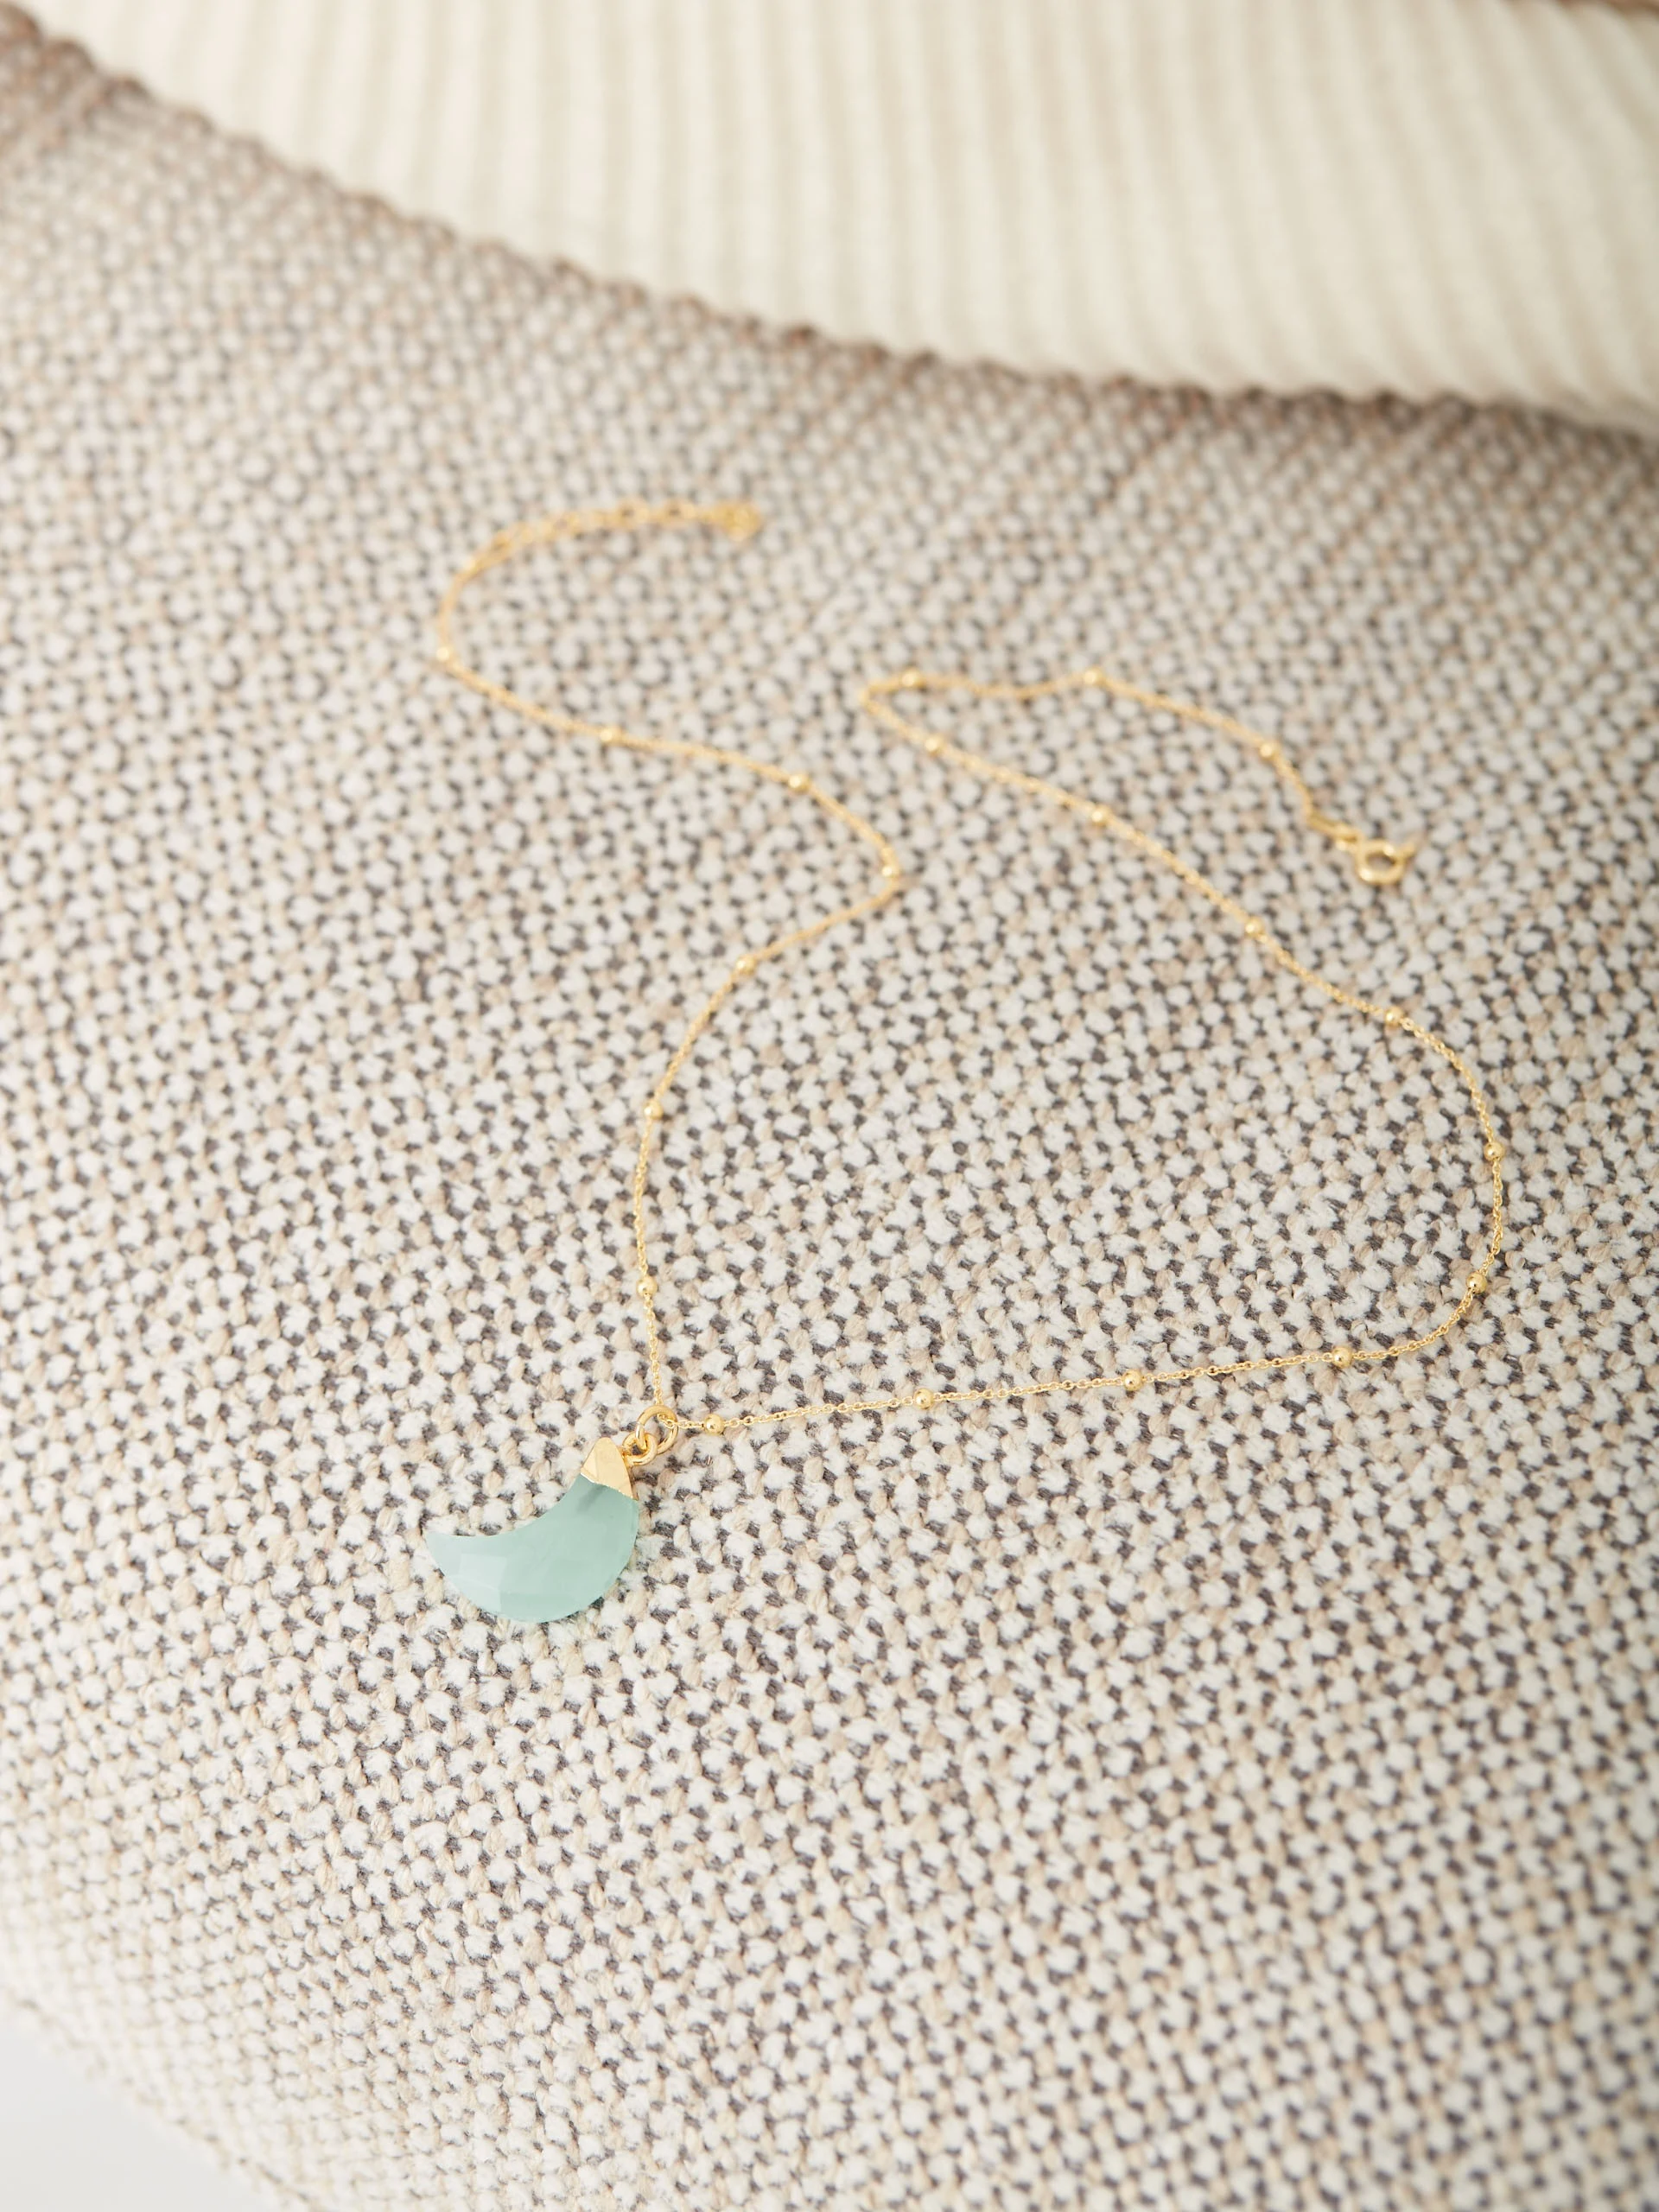 GOLD-PLATED MOON NECKLACE